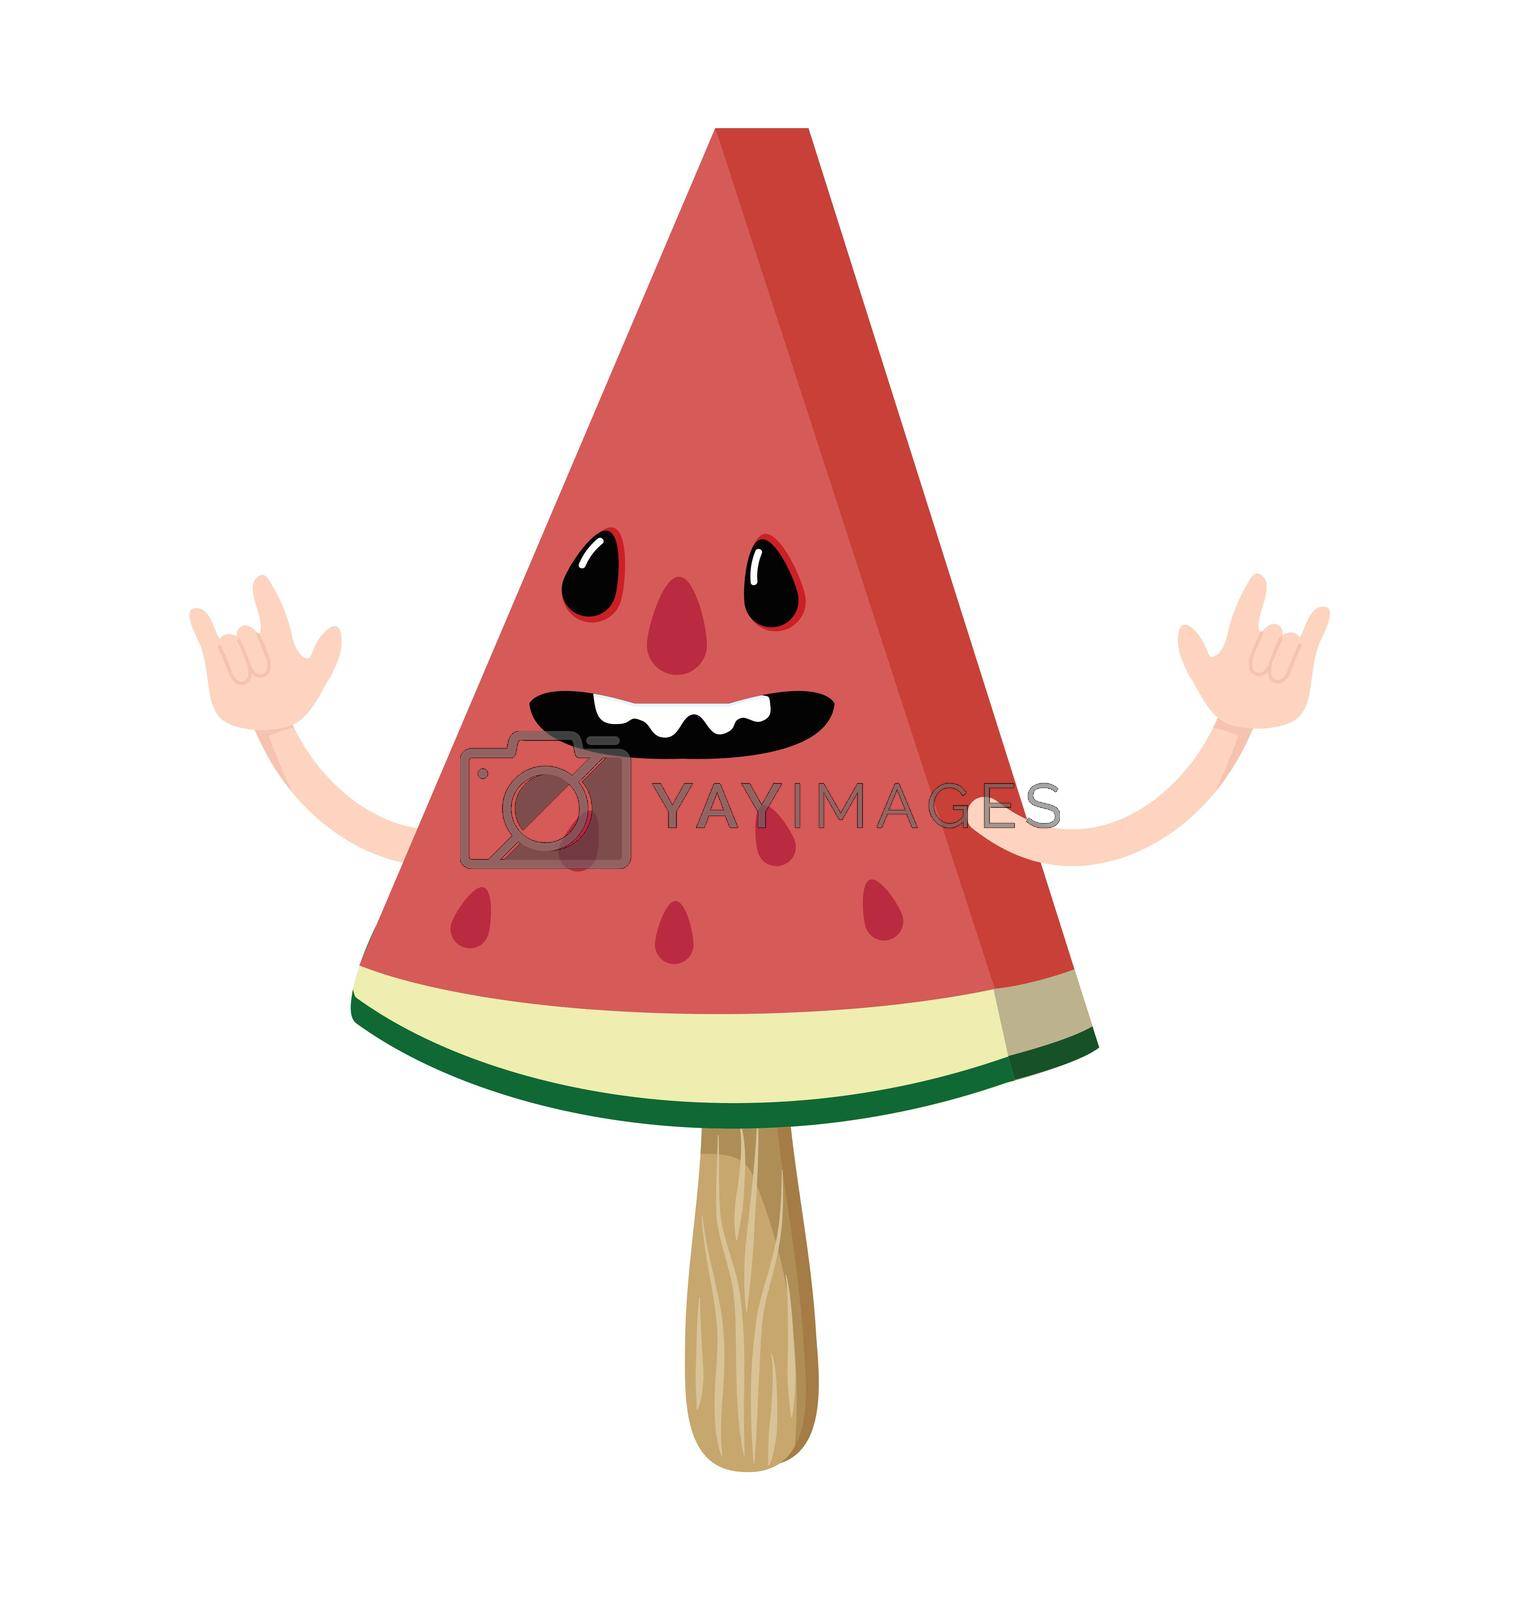 Royalty free image of slice Watermelon Cartoon character vector by focus_bell